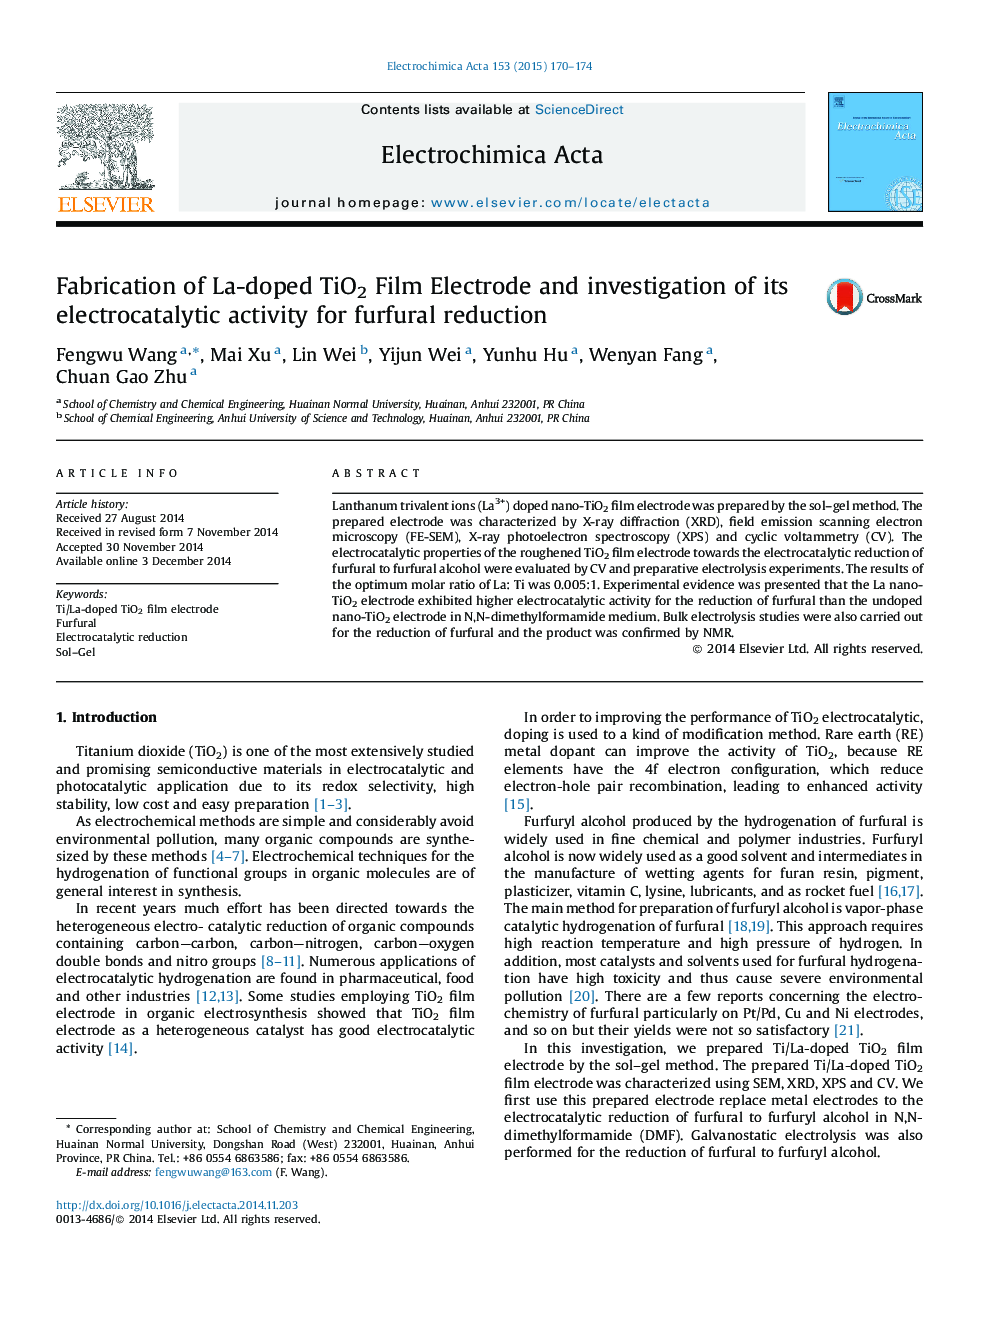 Fabrication of La-doped TiO2 Film Electrode and investigation of its electrocatalytic activity for furfural reduction